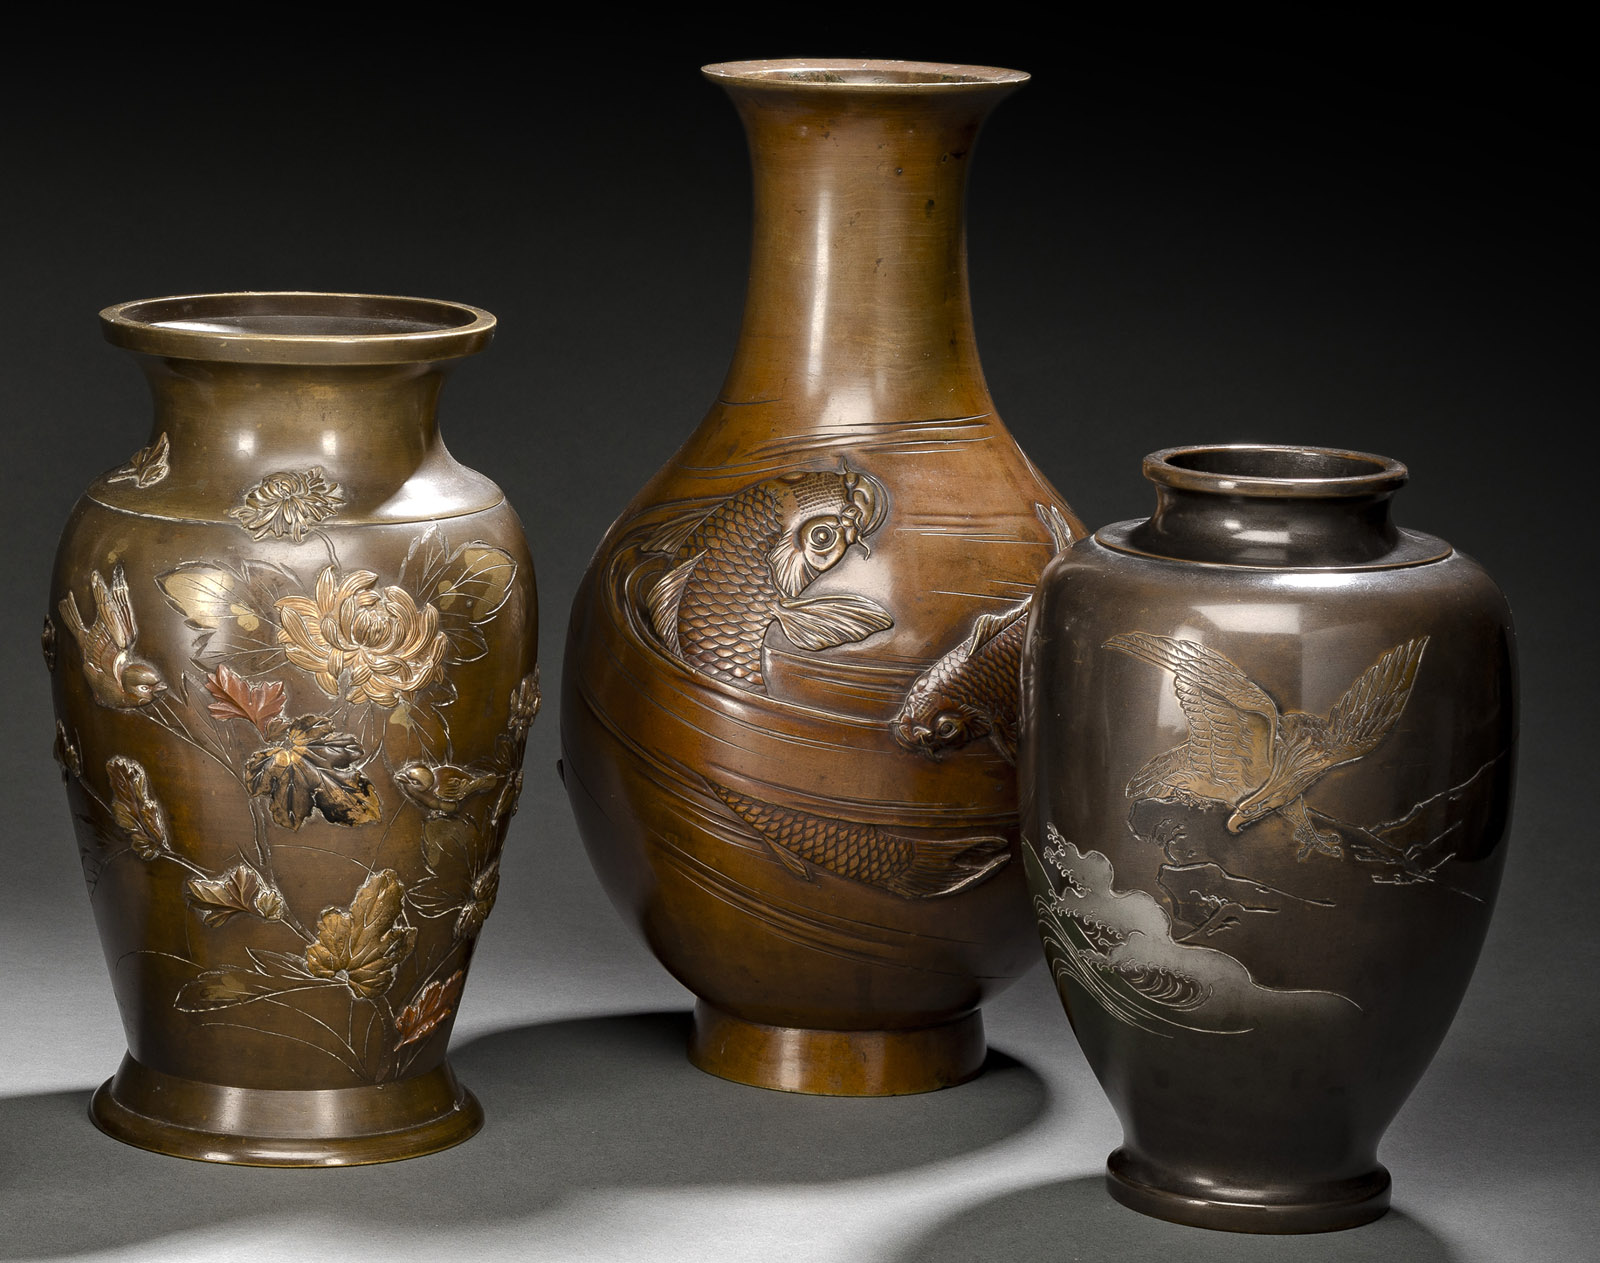 THREE BRONZE VASES AMONG OTHERS DECORATED WITH SPARROWS, AN EAGLE AND CARPS